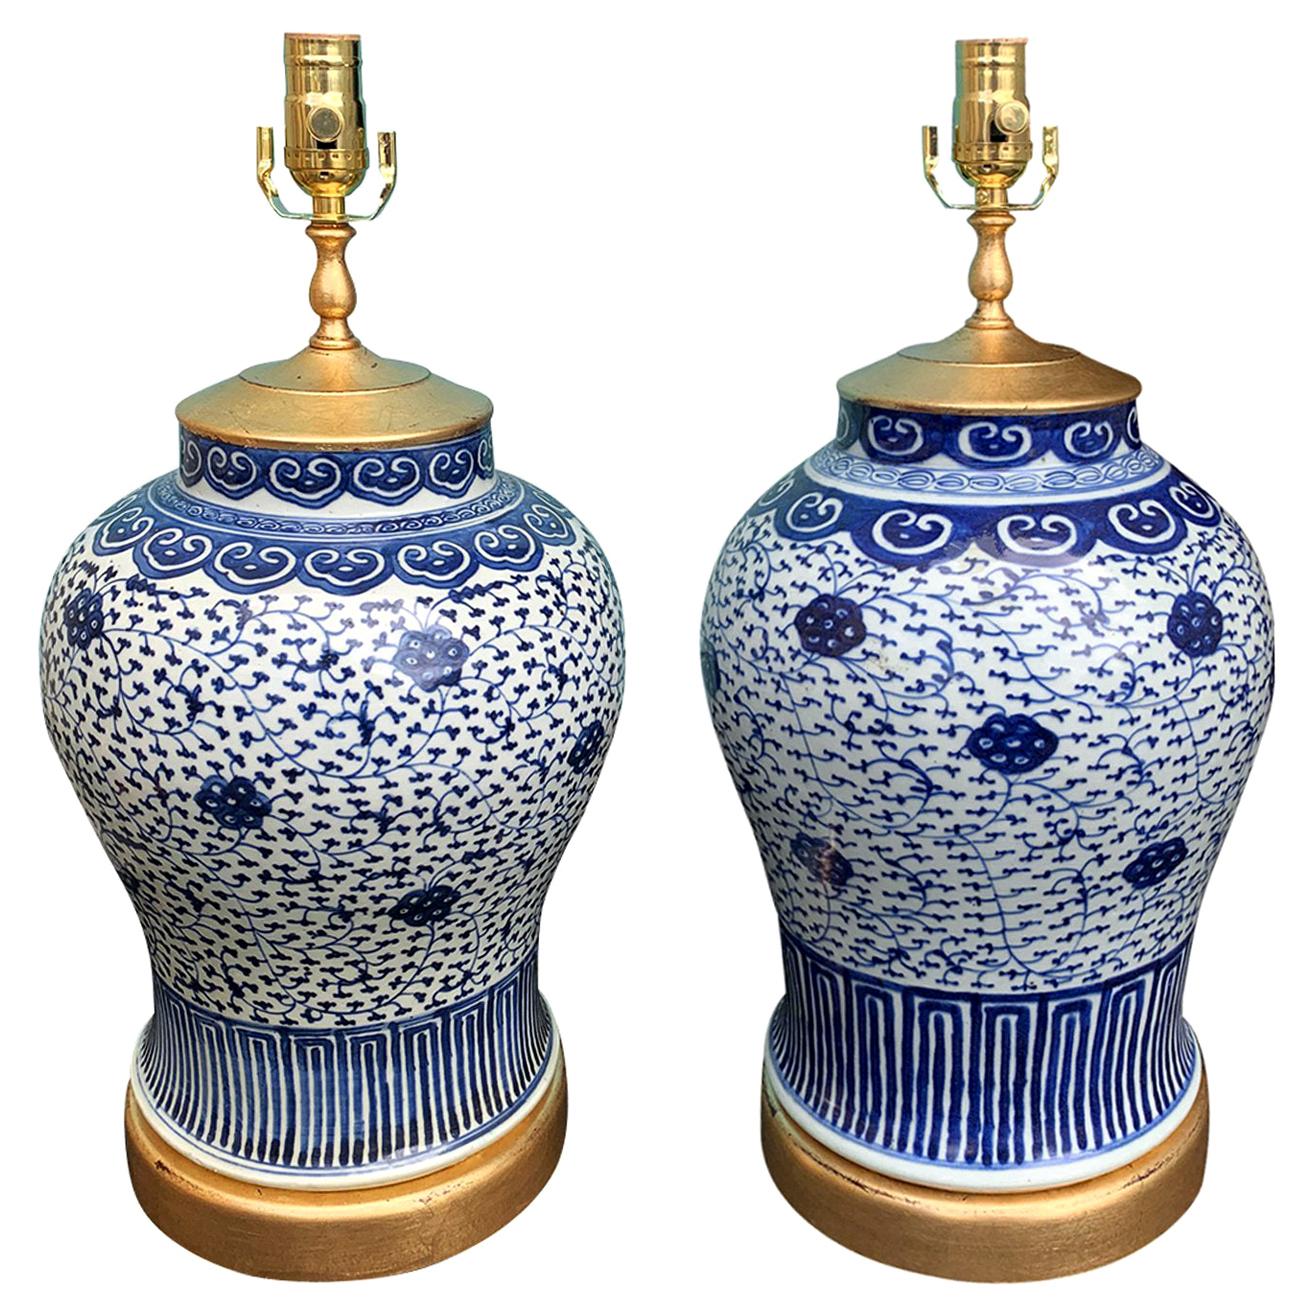 Pair of Late 19th-Early 20th Century Blue & White Vases as Lamps, Giltwood Bases